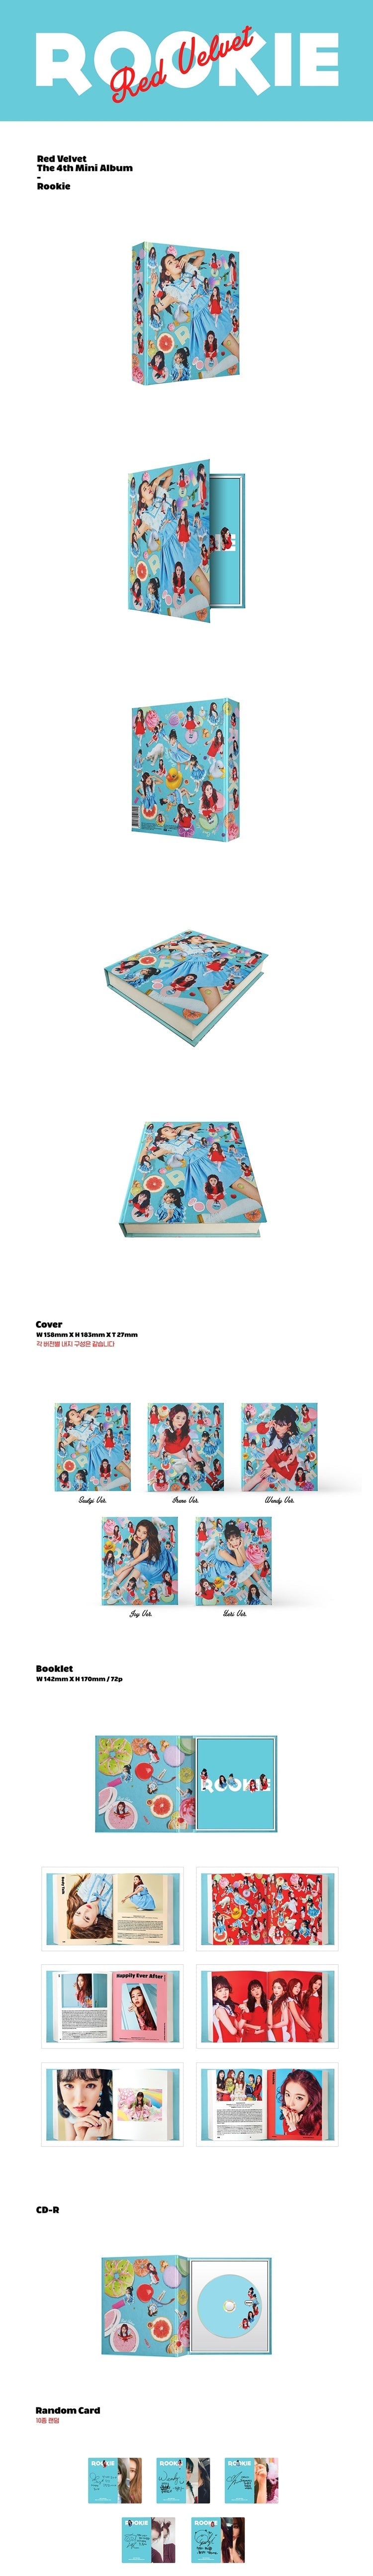 1 CD
1 Booklet (72 pages)
1 Photo Card (random out of 10 types)